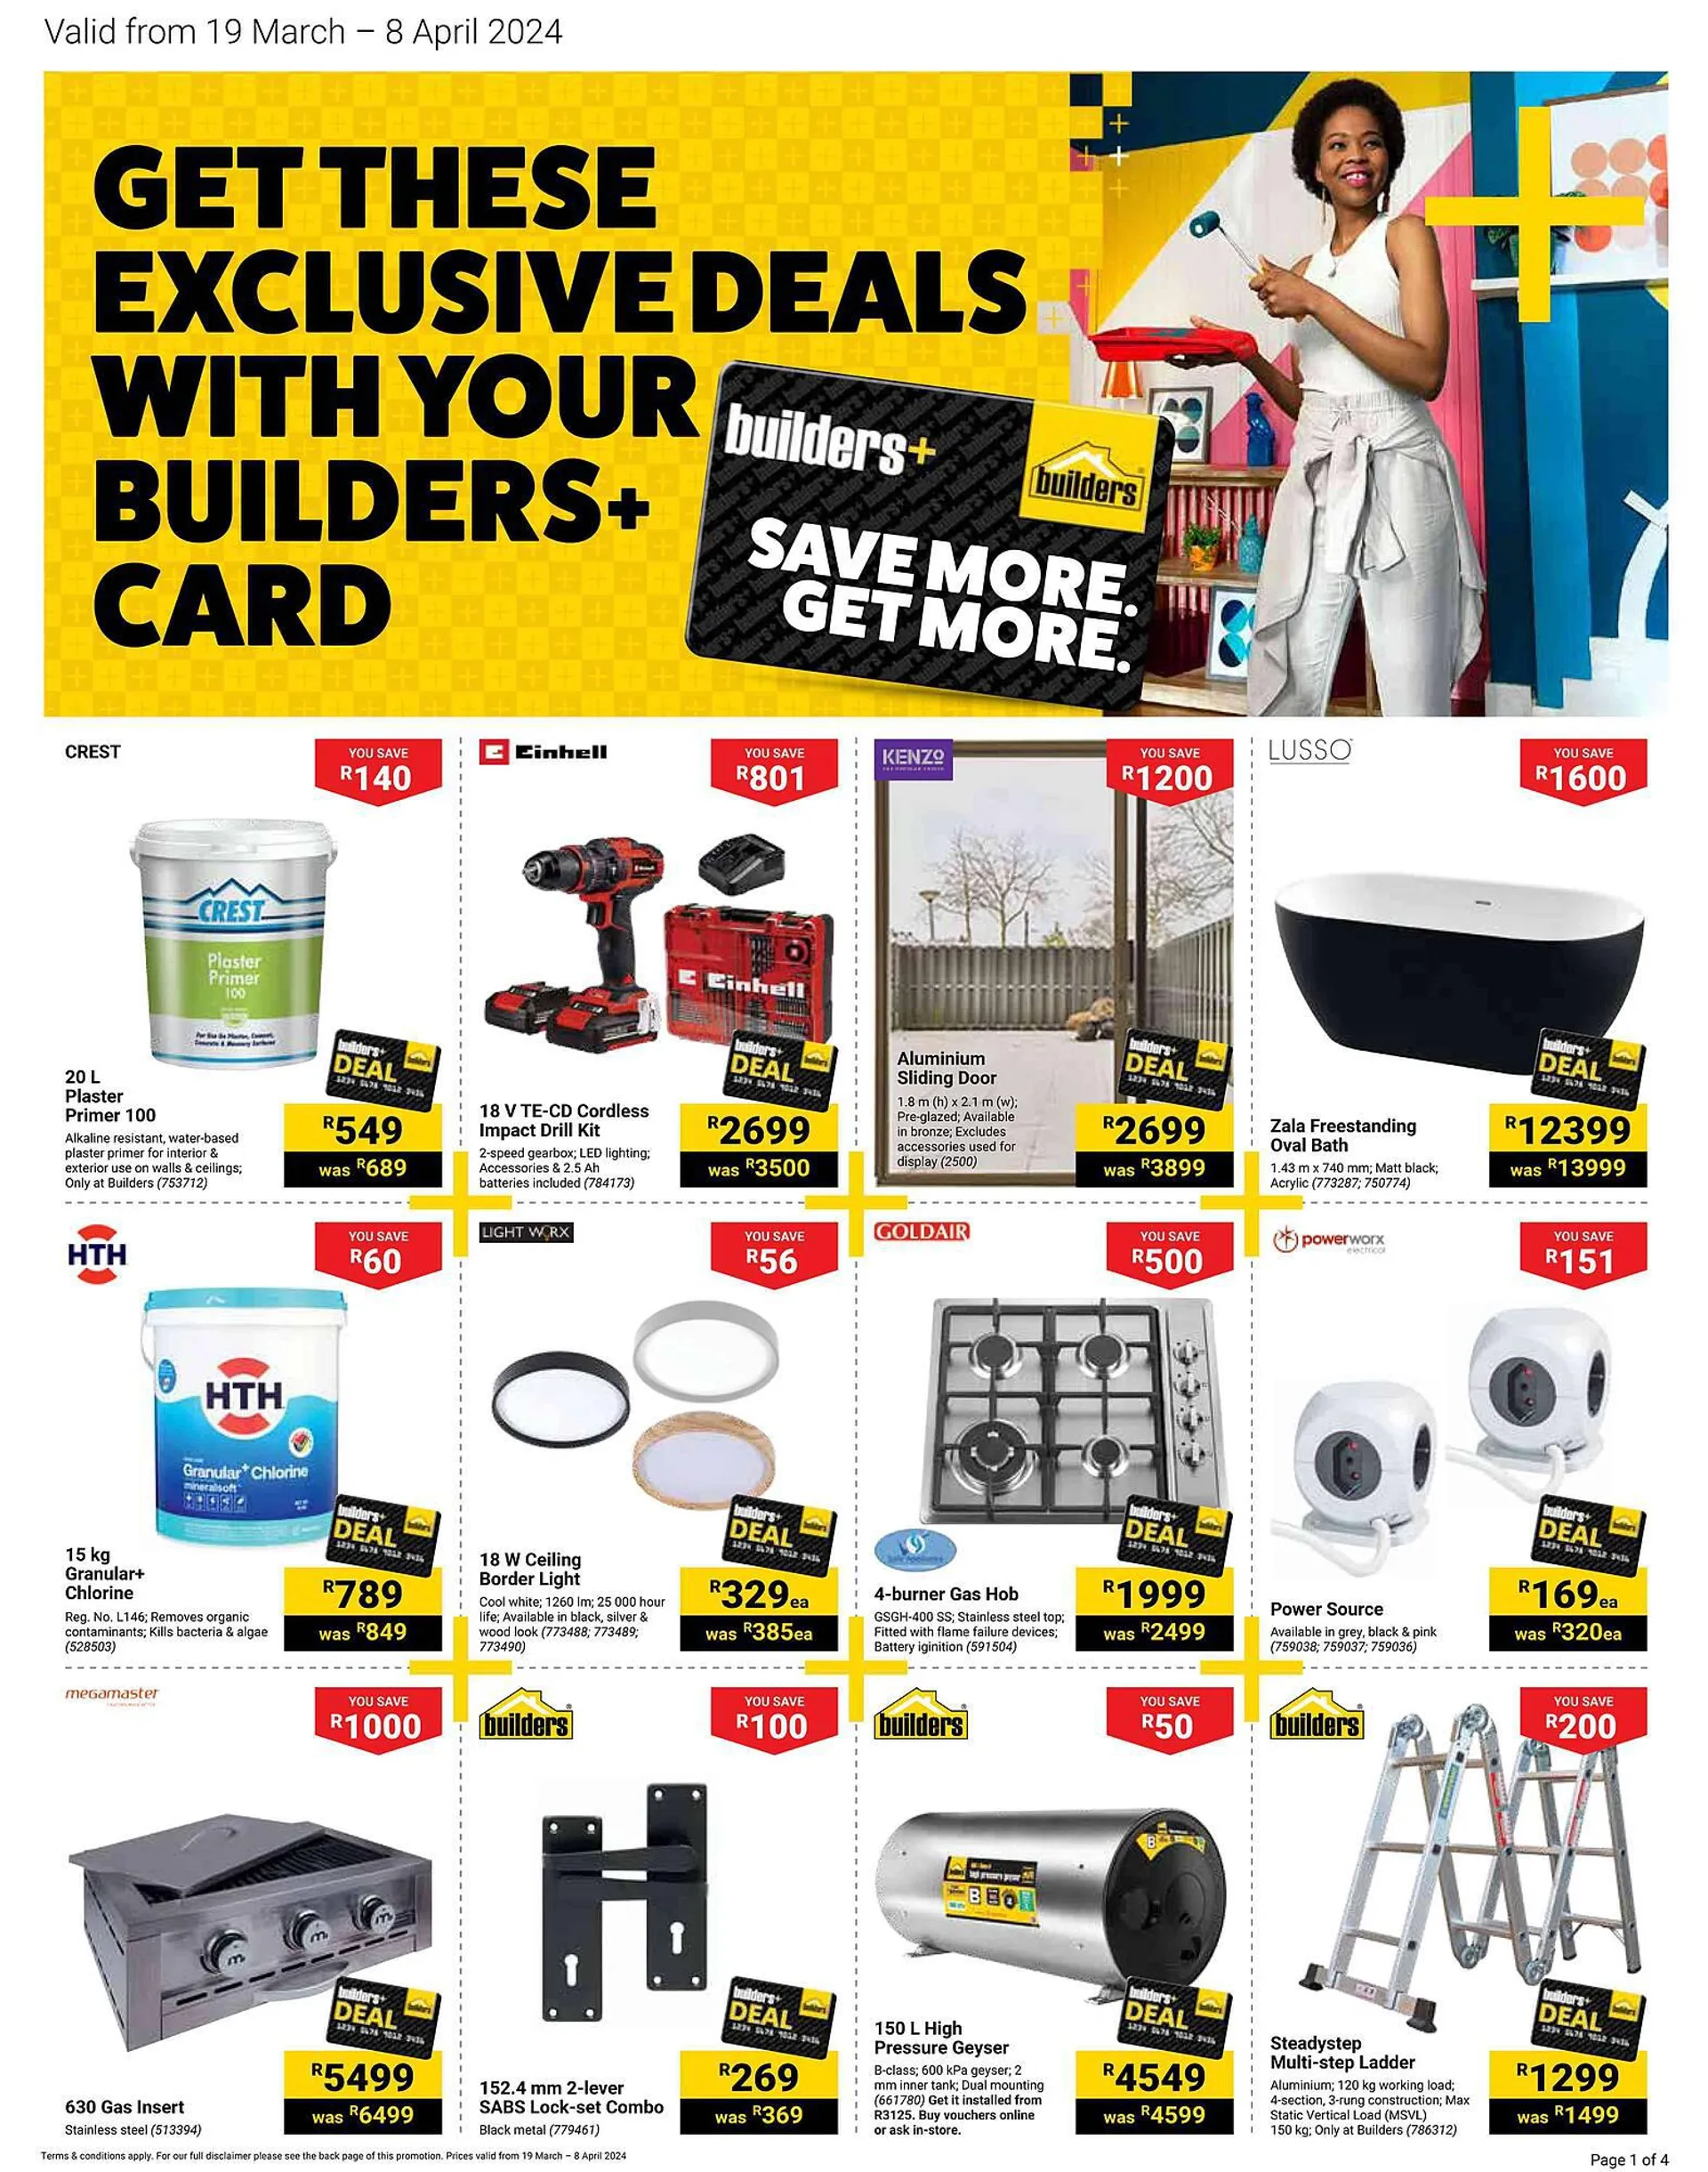 Builders Warehouse catalogue - 19 March 8 April 2024 - Page 1